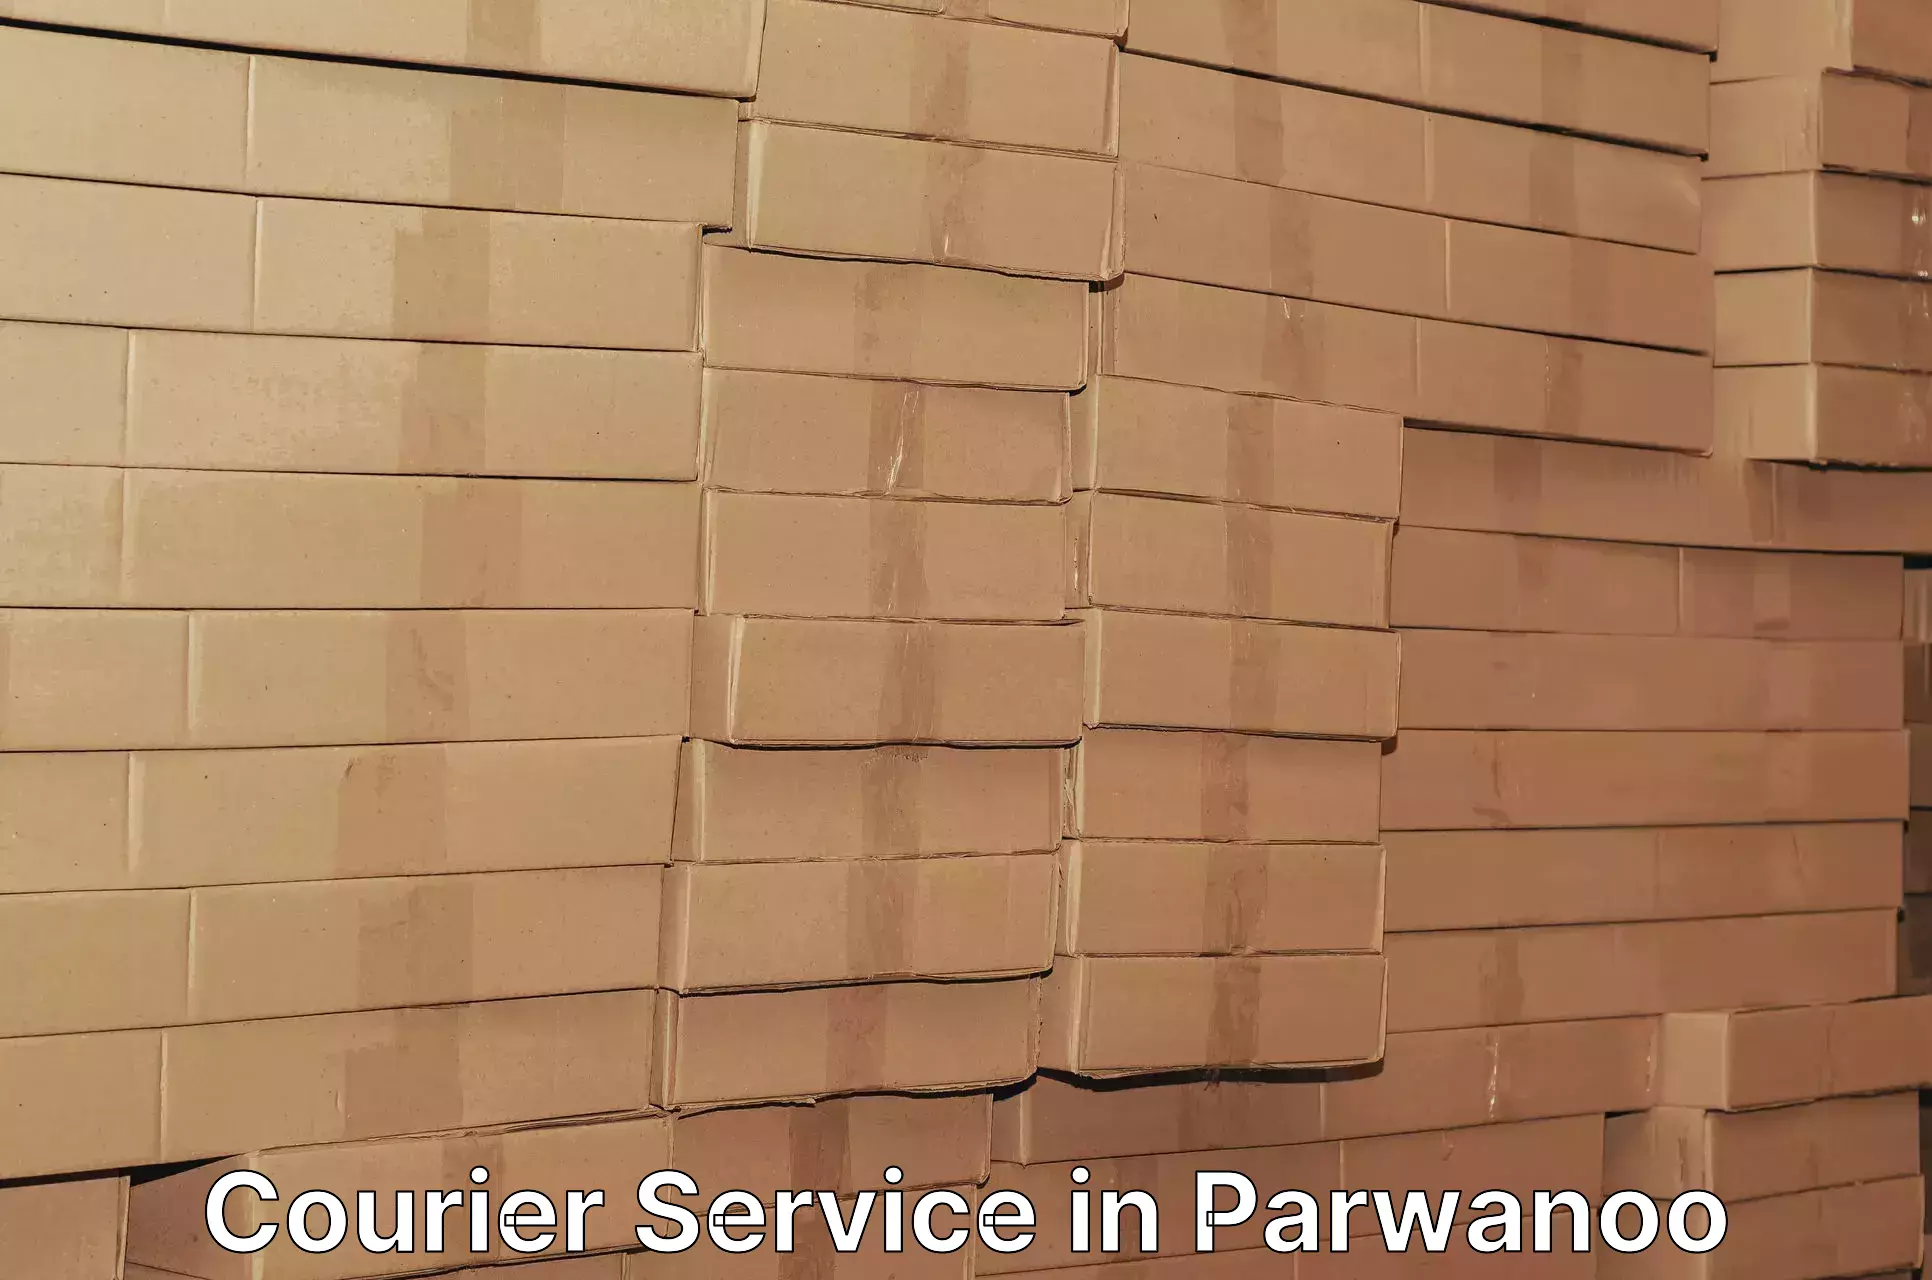 Personalized courier experiences in Parwanoo